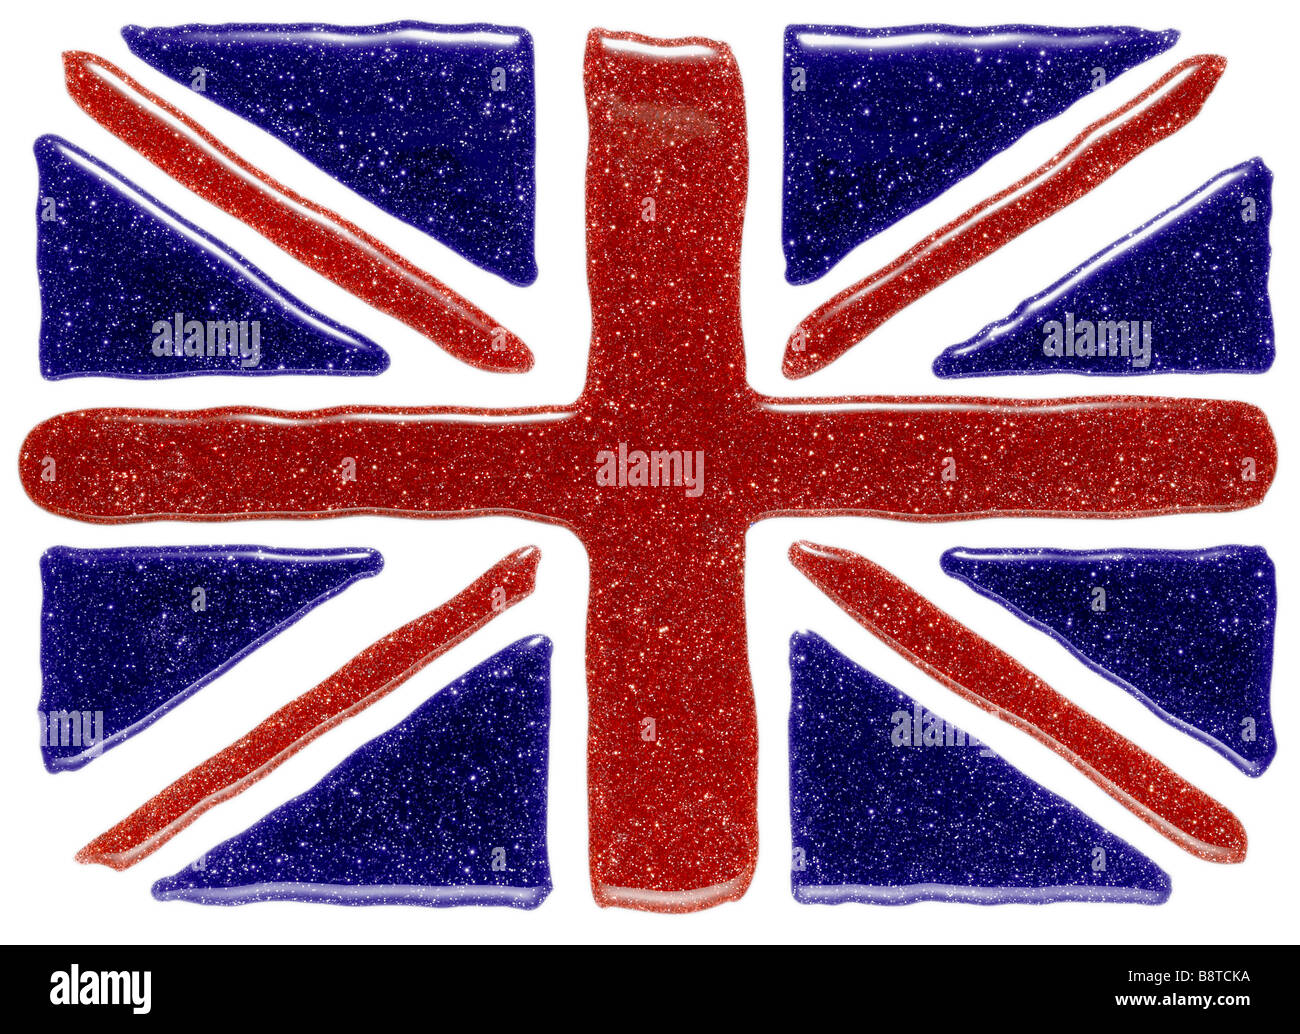 Union Jack made up from blue and red nail varnish Stock Photo